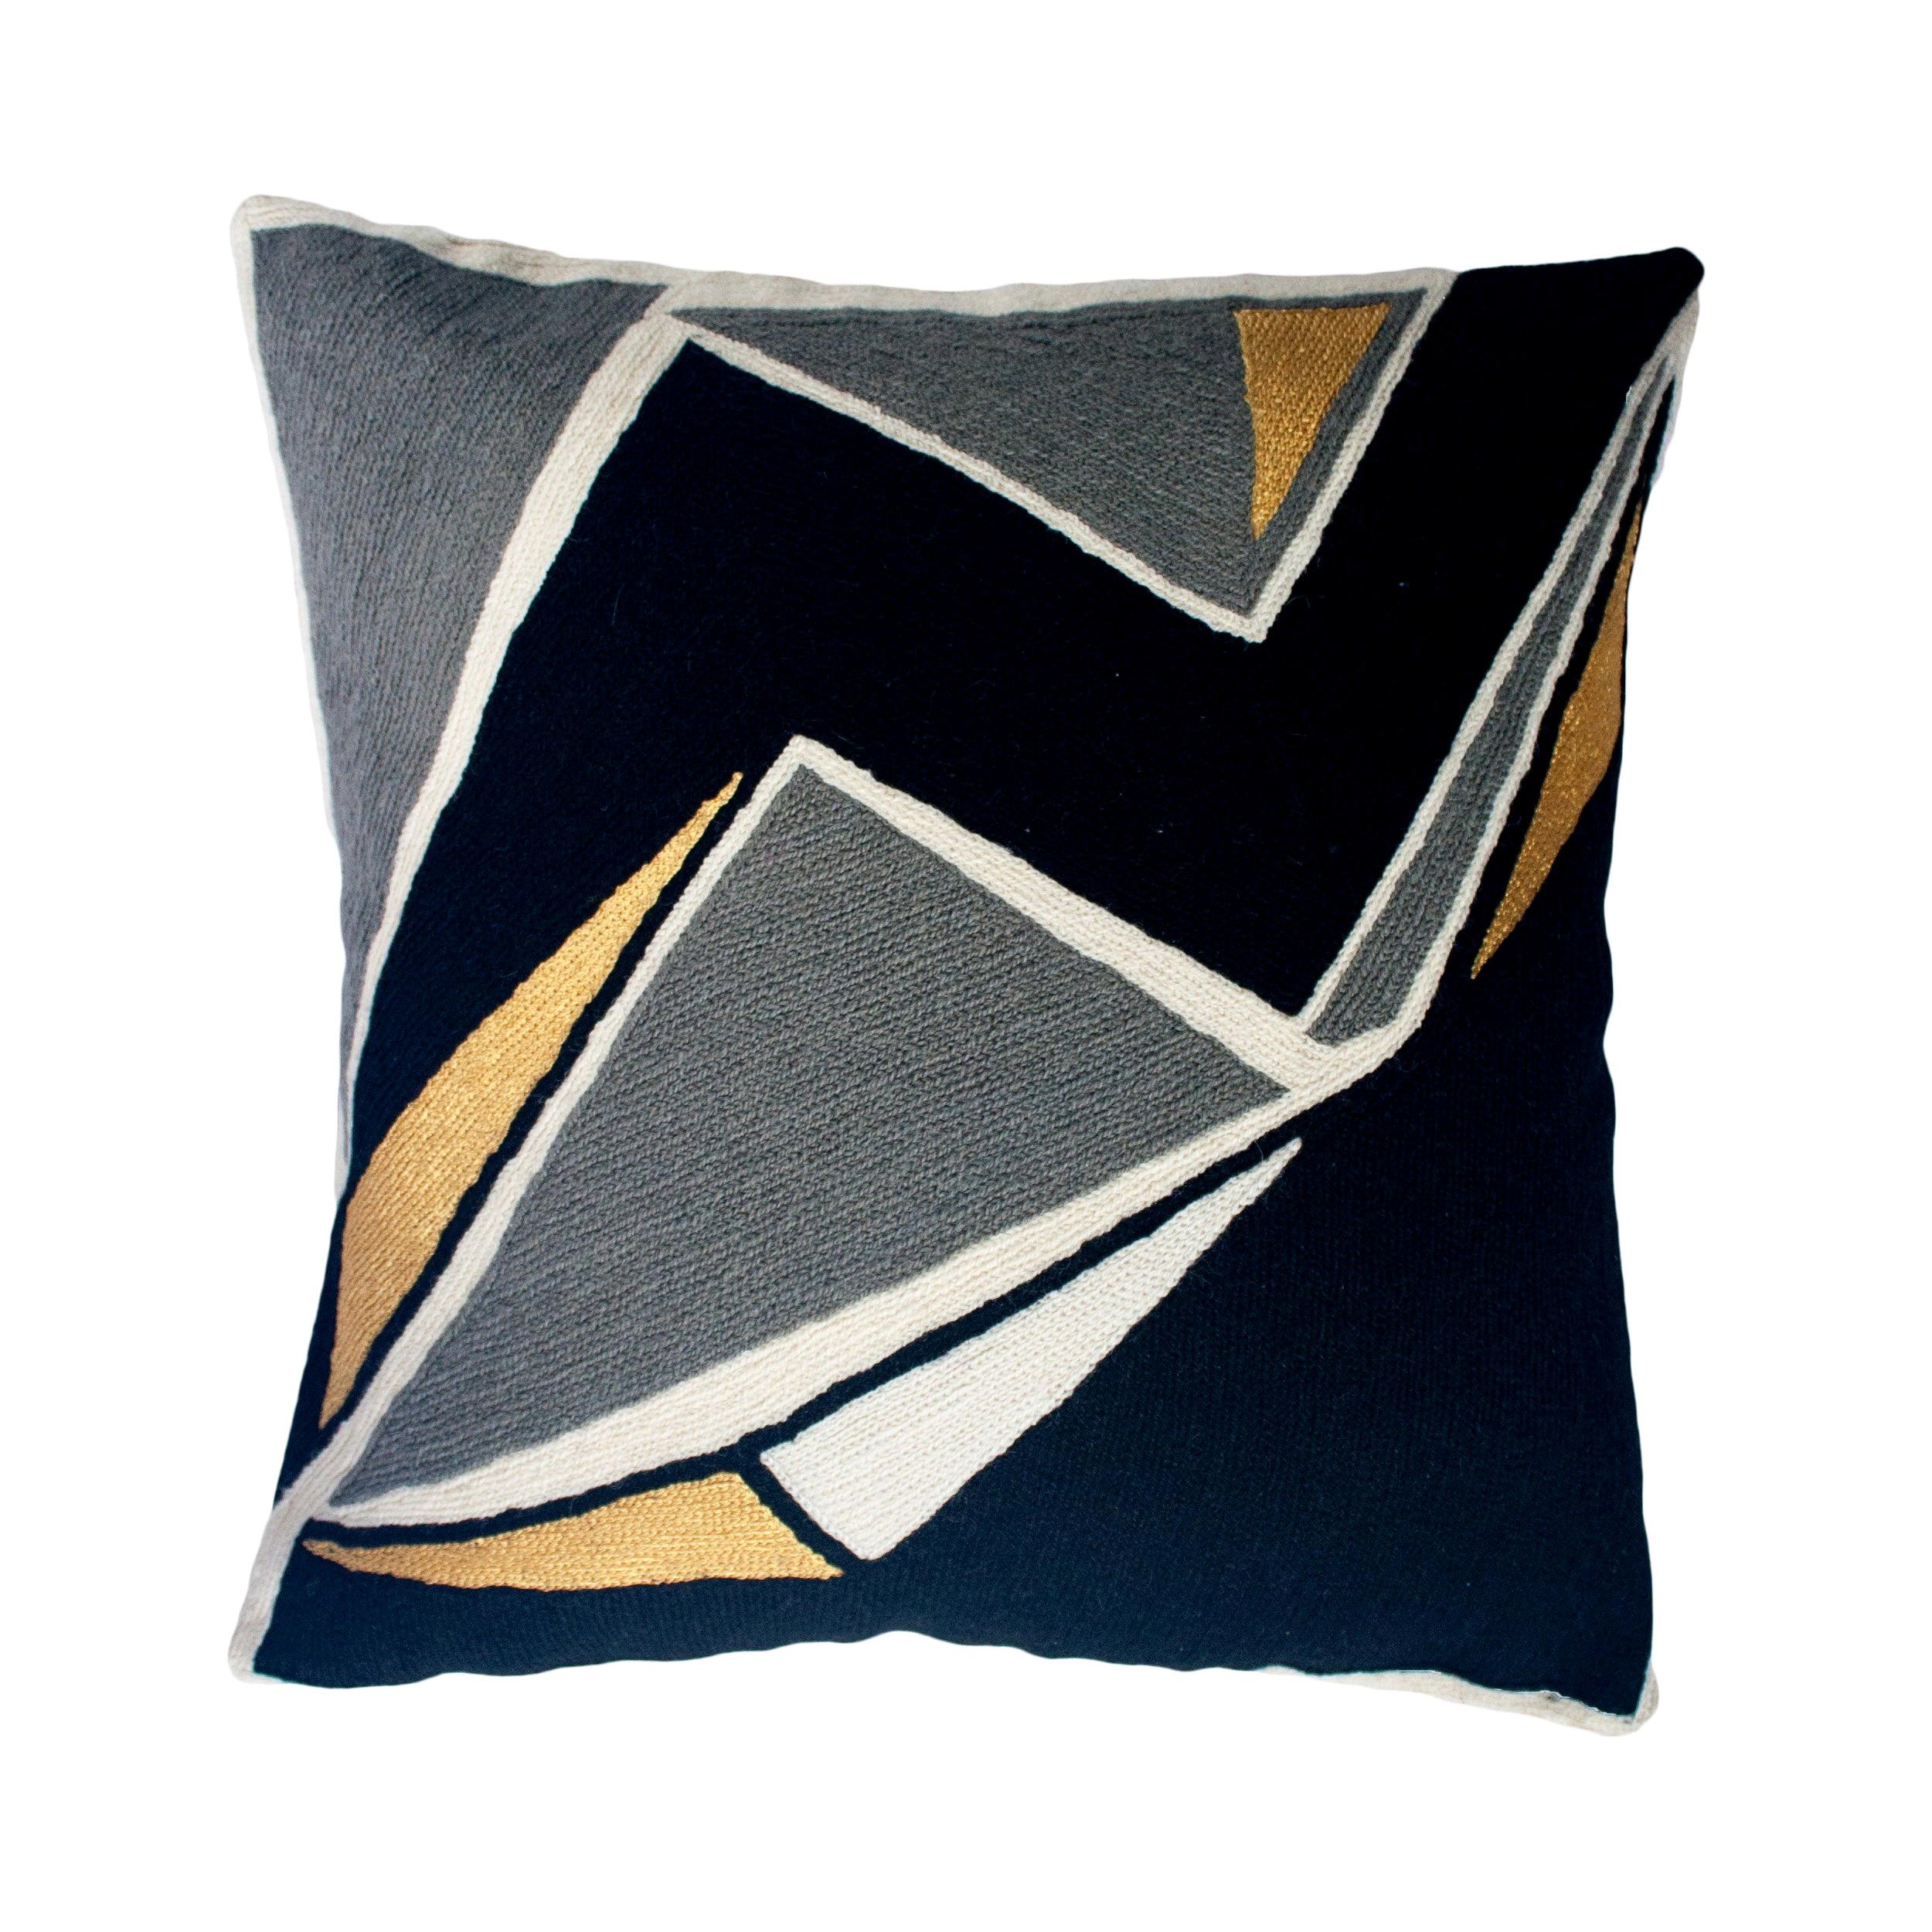 Modern Geometric Detroit Black Hand Embroidered Throw Pillow Cover